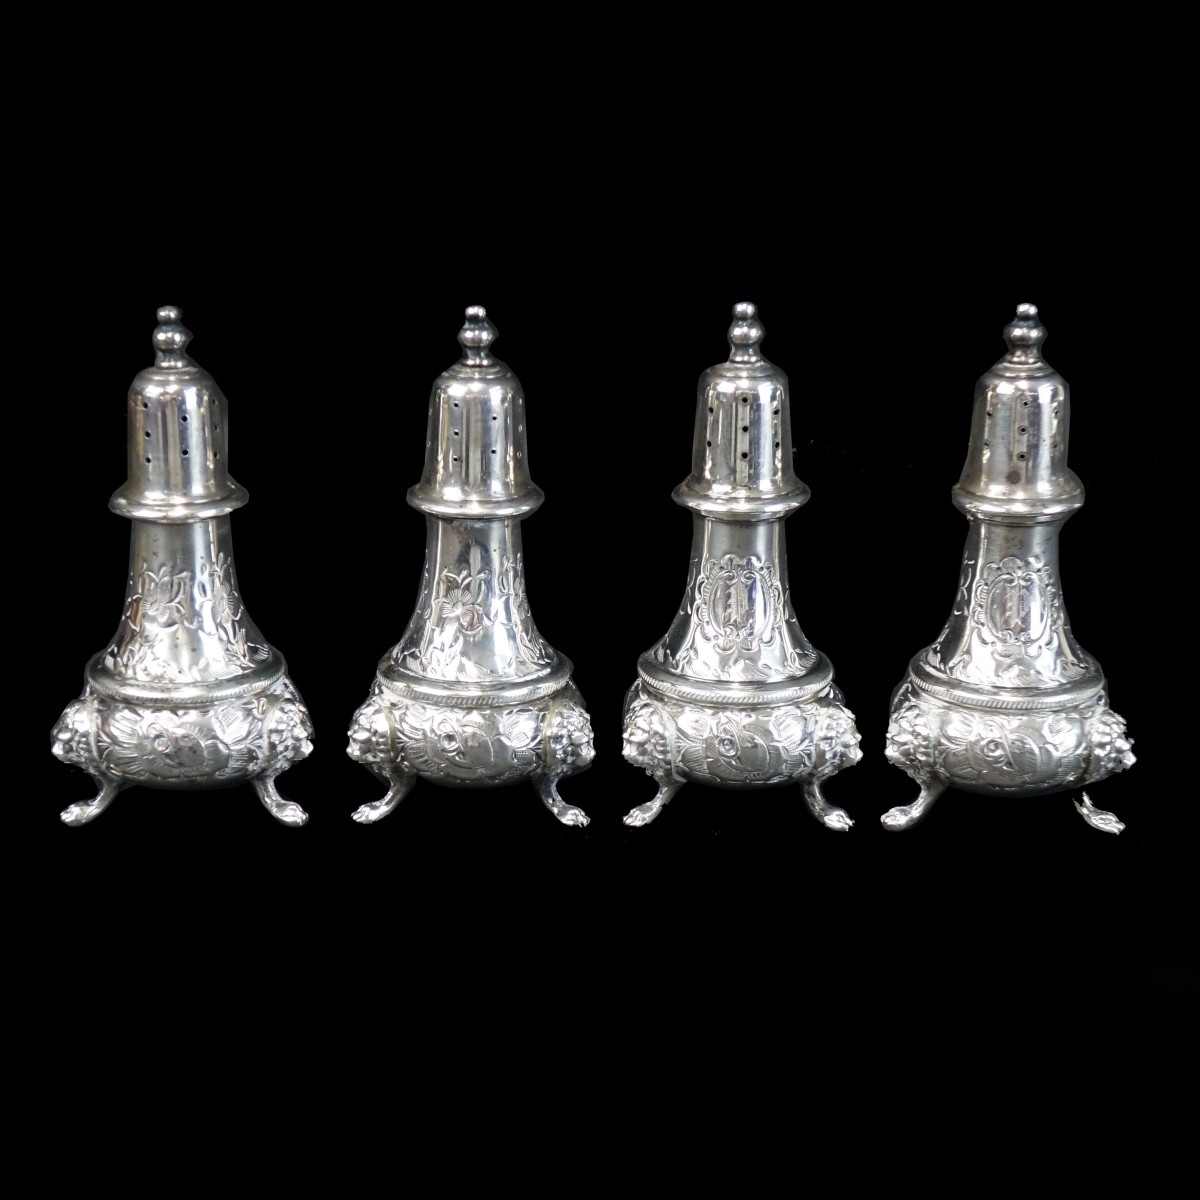 Sterling Shakers